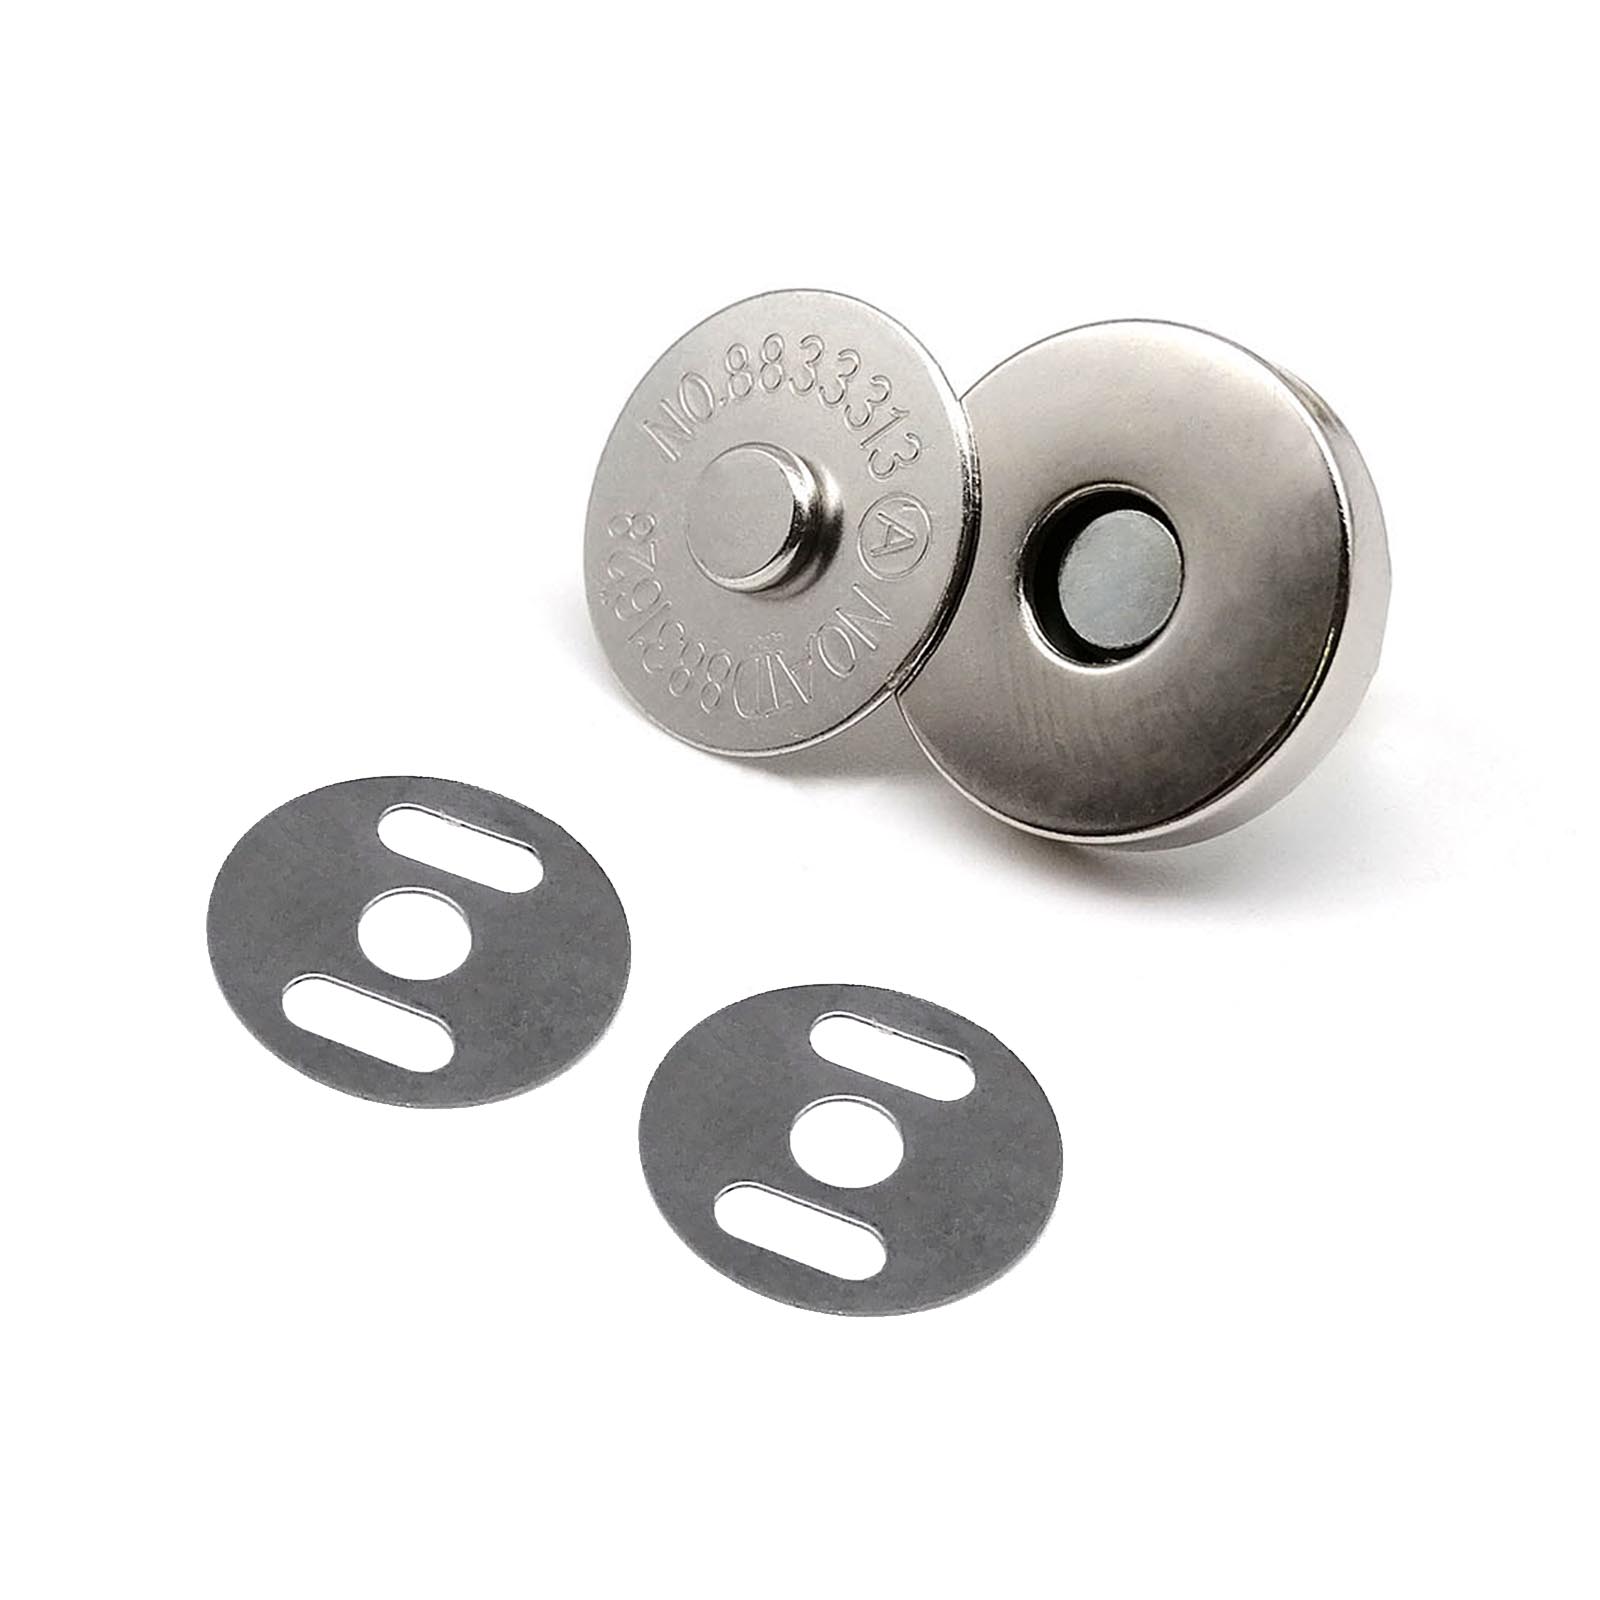 10mm Nickel Sew on Magnetic Snaps/Closures - 10 Sets